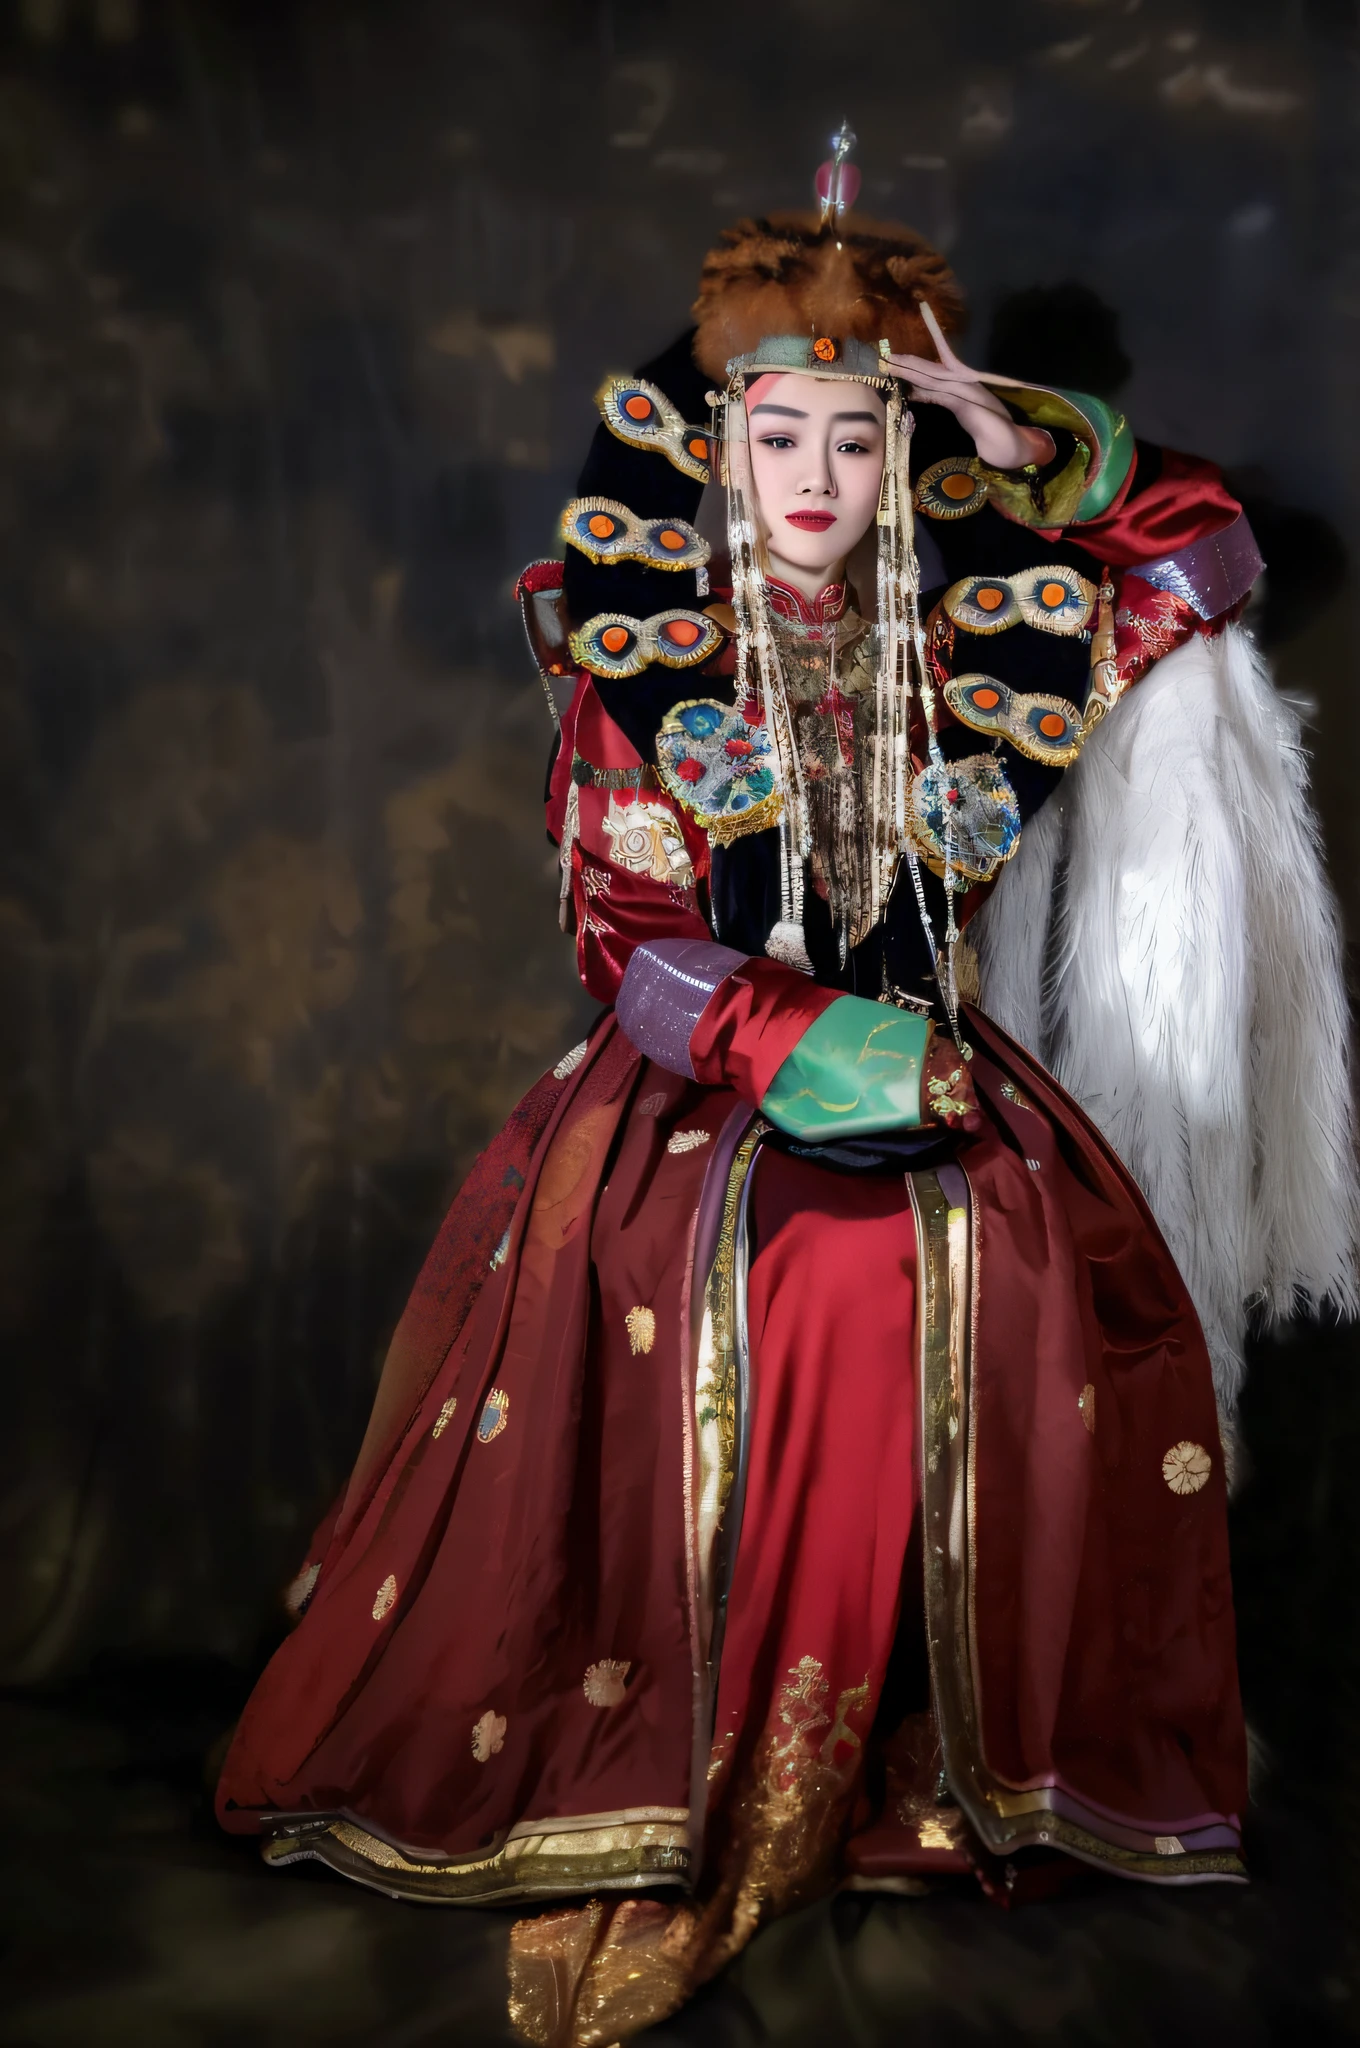 Masterpiece, best quality, fine details, Arakfi in red and gold dress, golden accessories, young woman as Genghis Khan, she dressed in shamanic costume, Kazakh queen, traditional costume, dressed in gorgeous silk costume, sci-fi Tibetan fashion, inspired by Jinnong, traditional costume, court, Hanfu girl, traditional costume, traditional costume